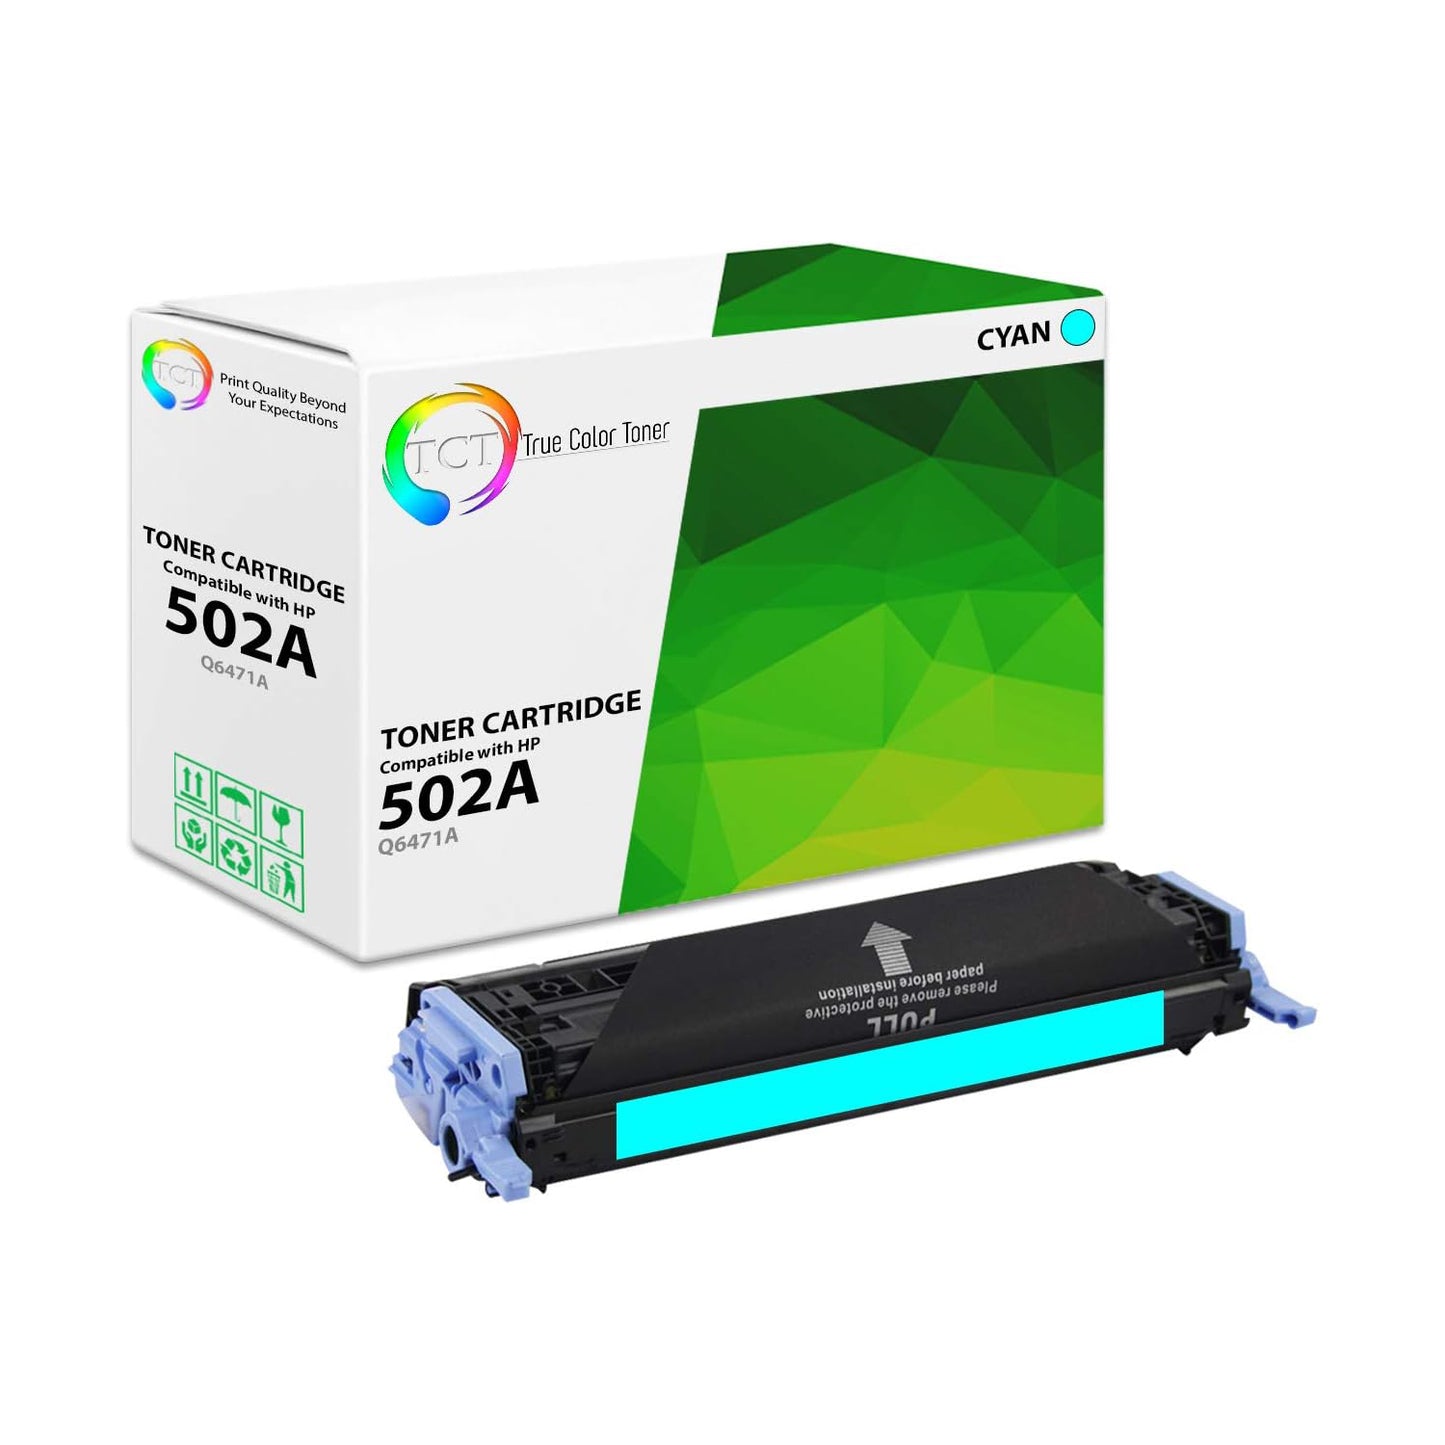 TCT Compatible Toner Cartridge Replacement for the HP 502A Series - 1 Pack Cyan